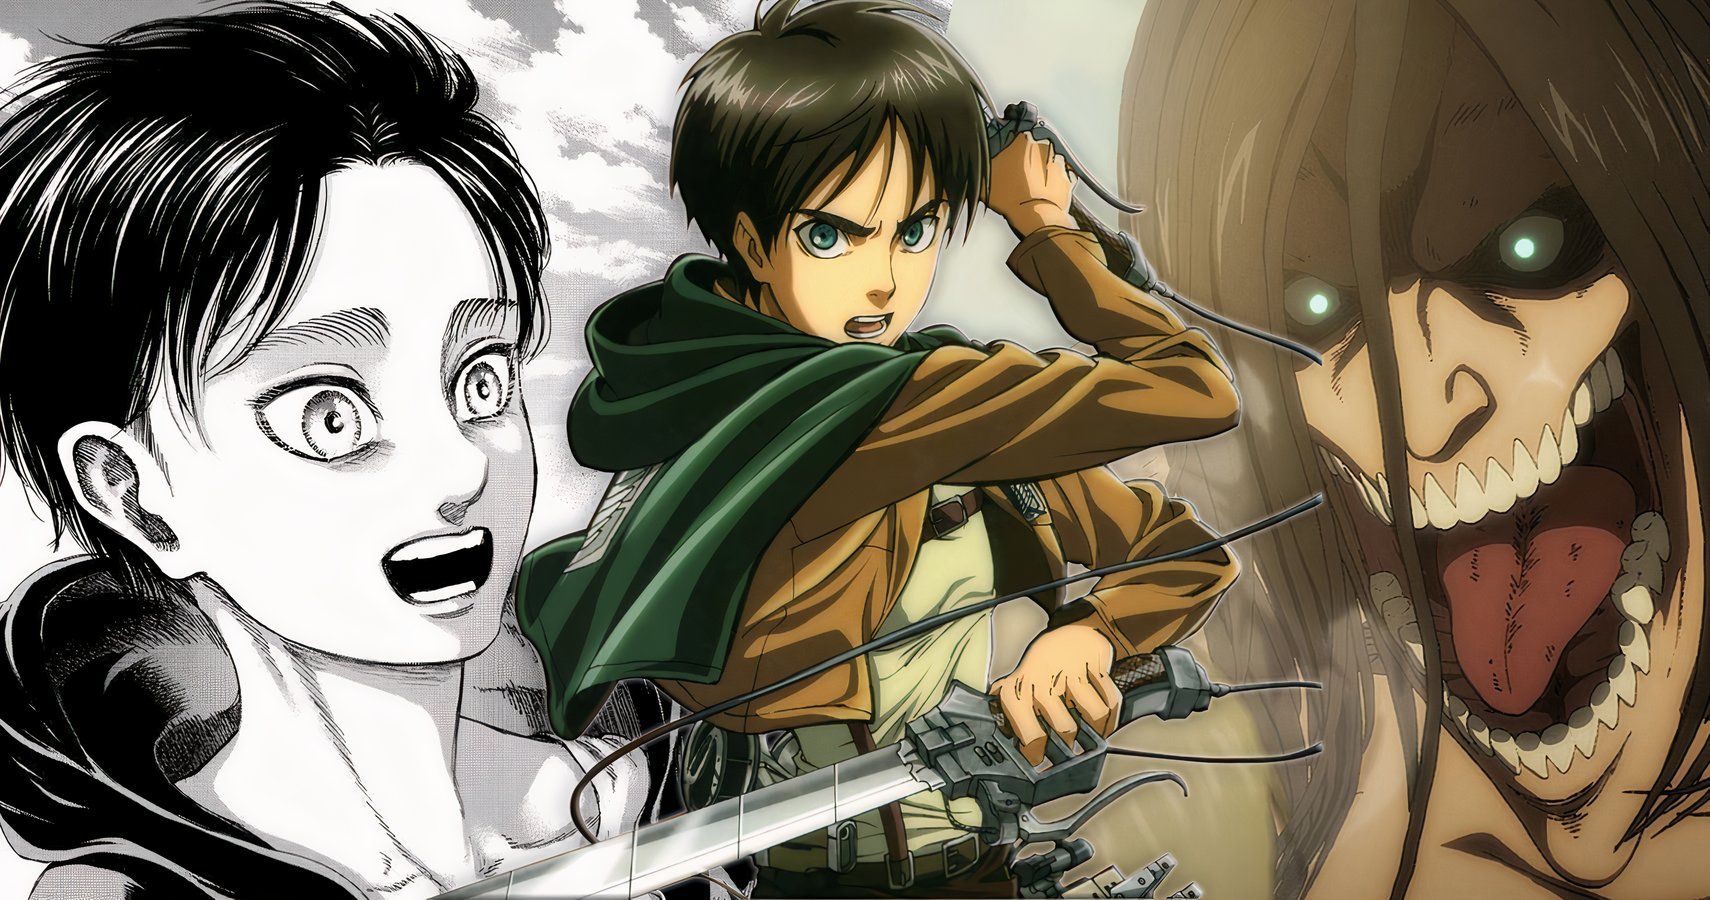 Eren as a human and Titan in the Attack on Titan manga and anime